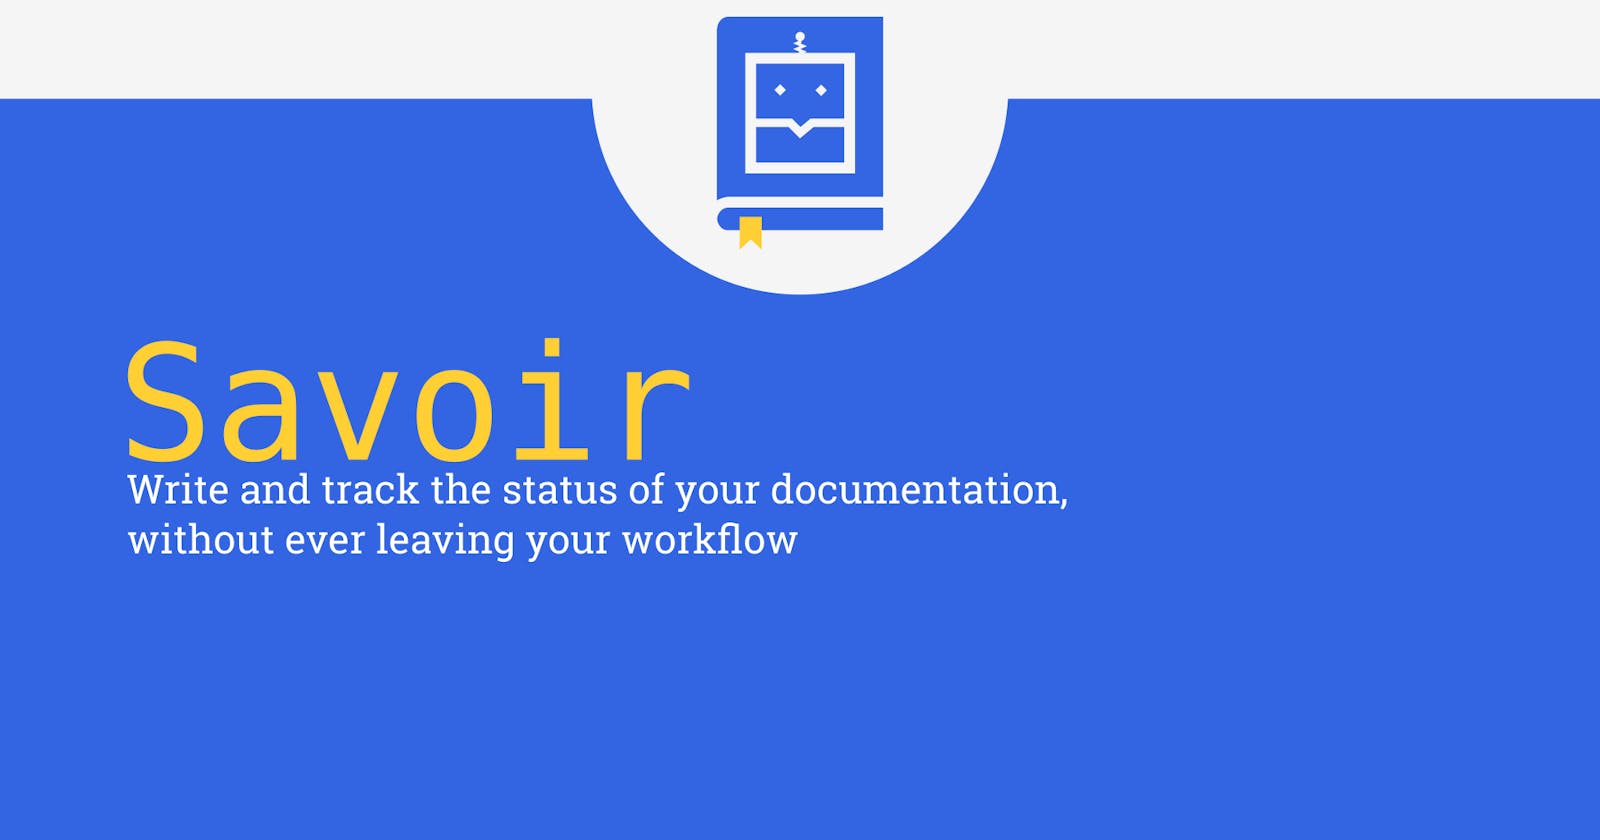 Savoir and documentation tracking